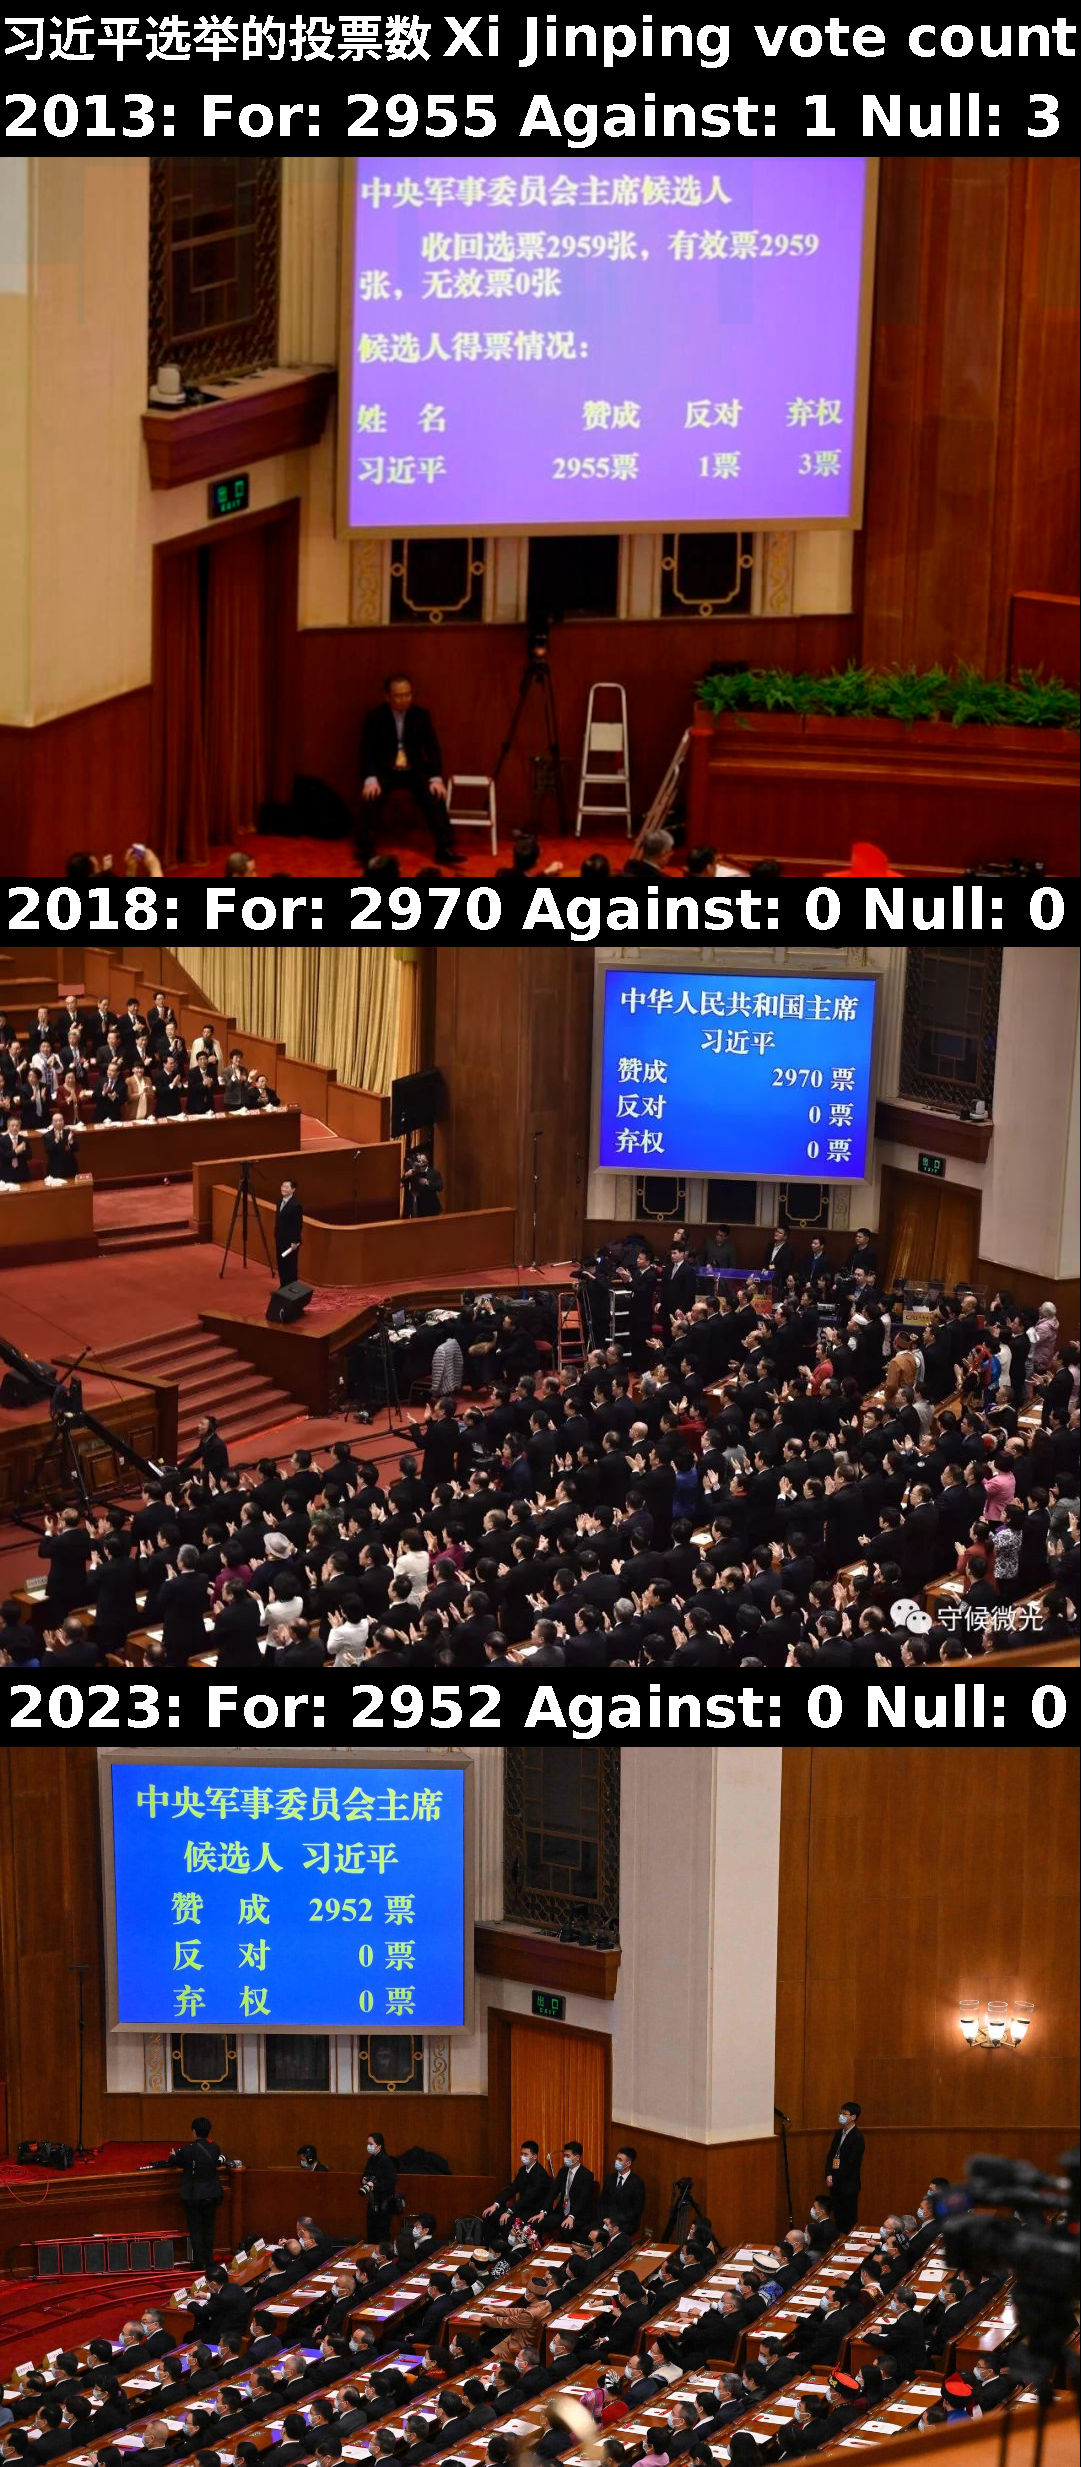 Xi Jinping elected 2970 for 0 against in 2018